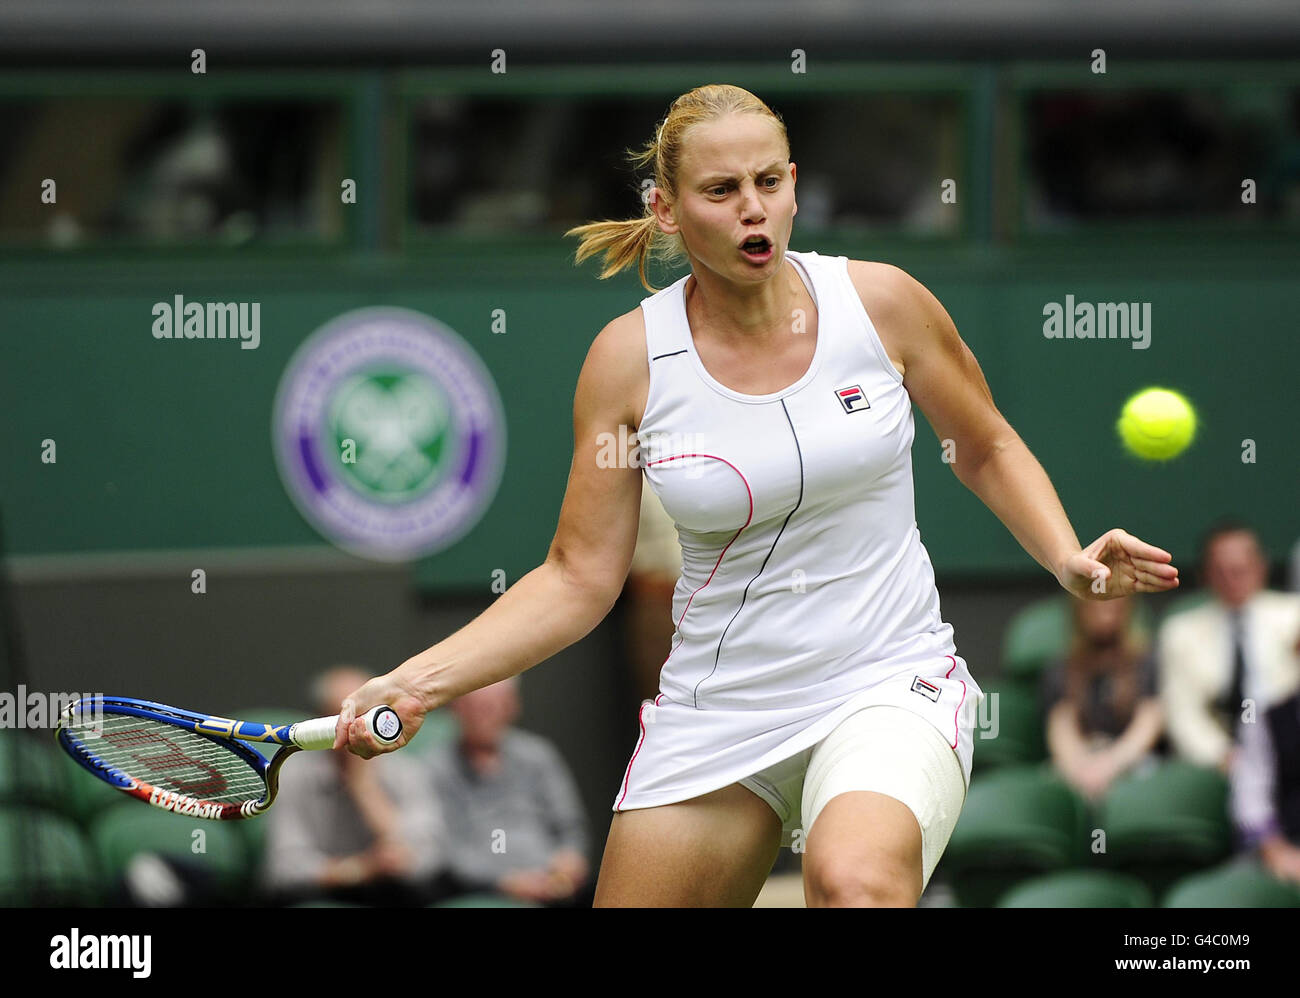 Australia's Jelena Dokic in action against Italy's Francesca Schiavone during the 2011 Wimbledon Championships at the all England Lawn Tennis and Croquet Club, Wimbledon. Stock Photo